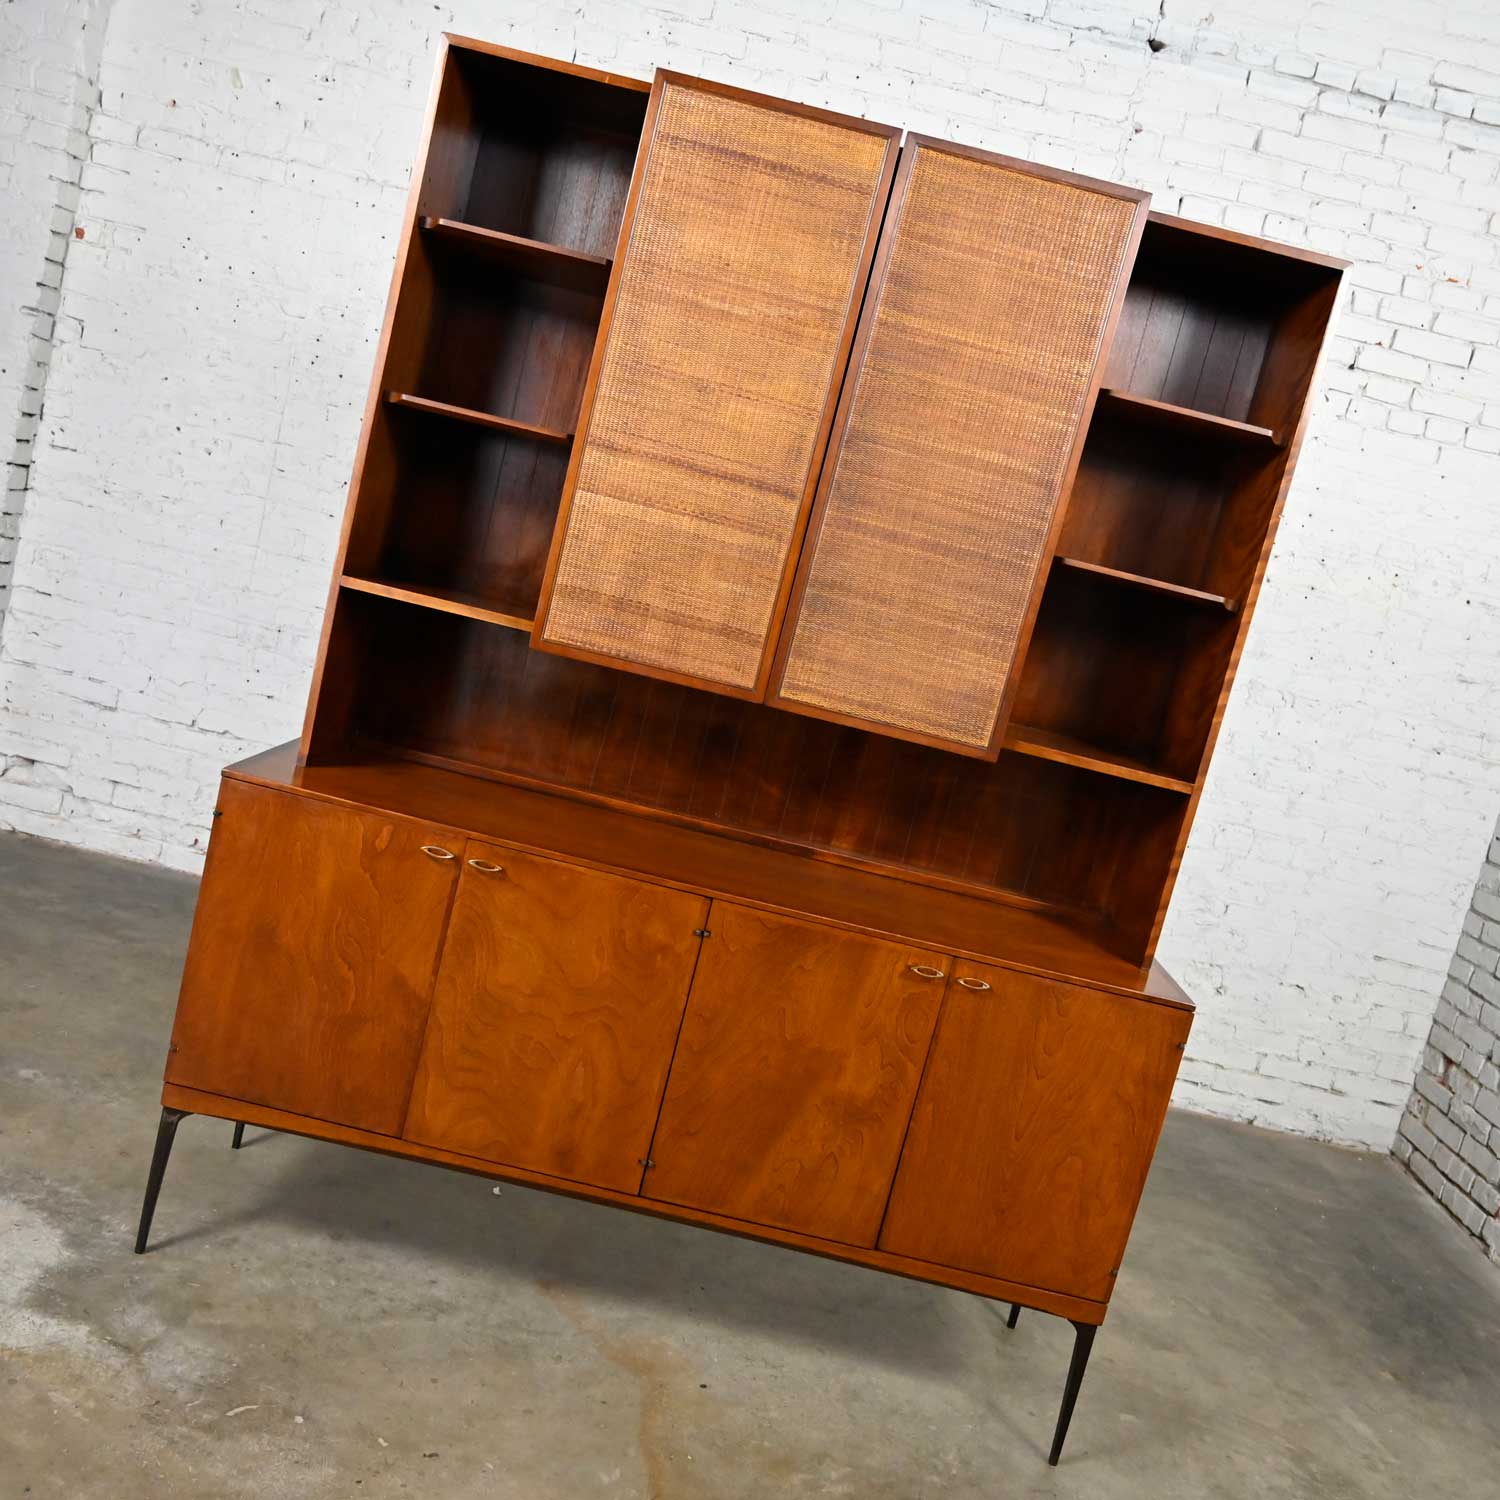 MCM 2-Piece China Hutch Cabinet Buffet by Heywood Wakefield for Contessa Collection